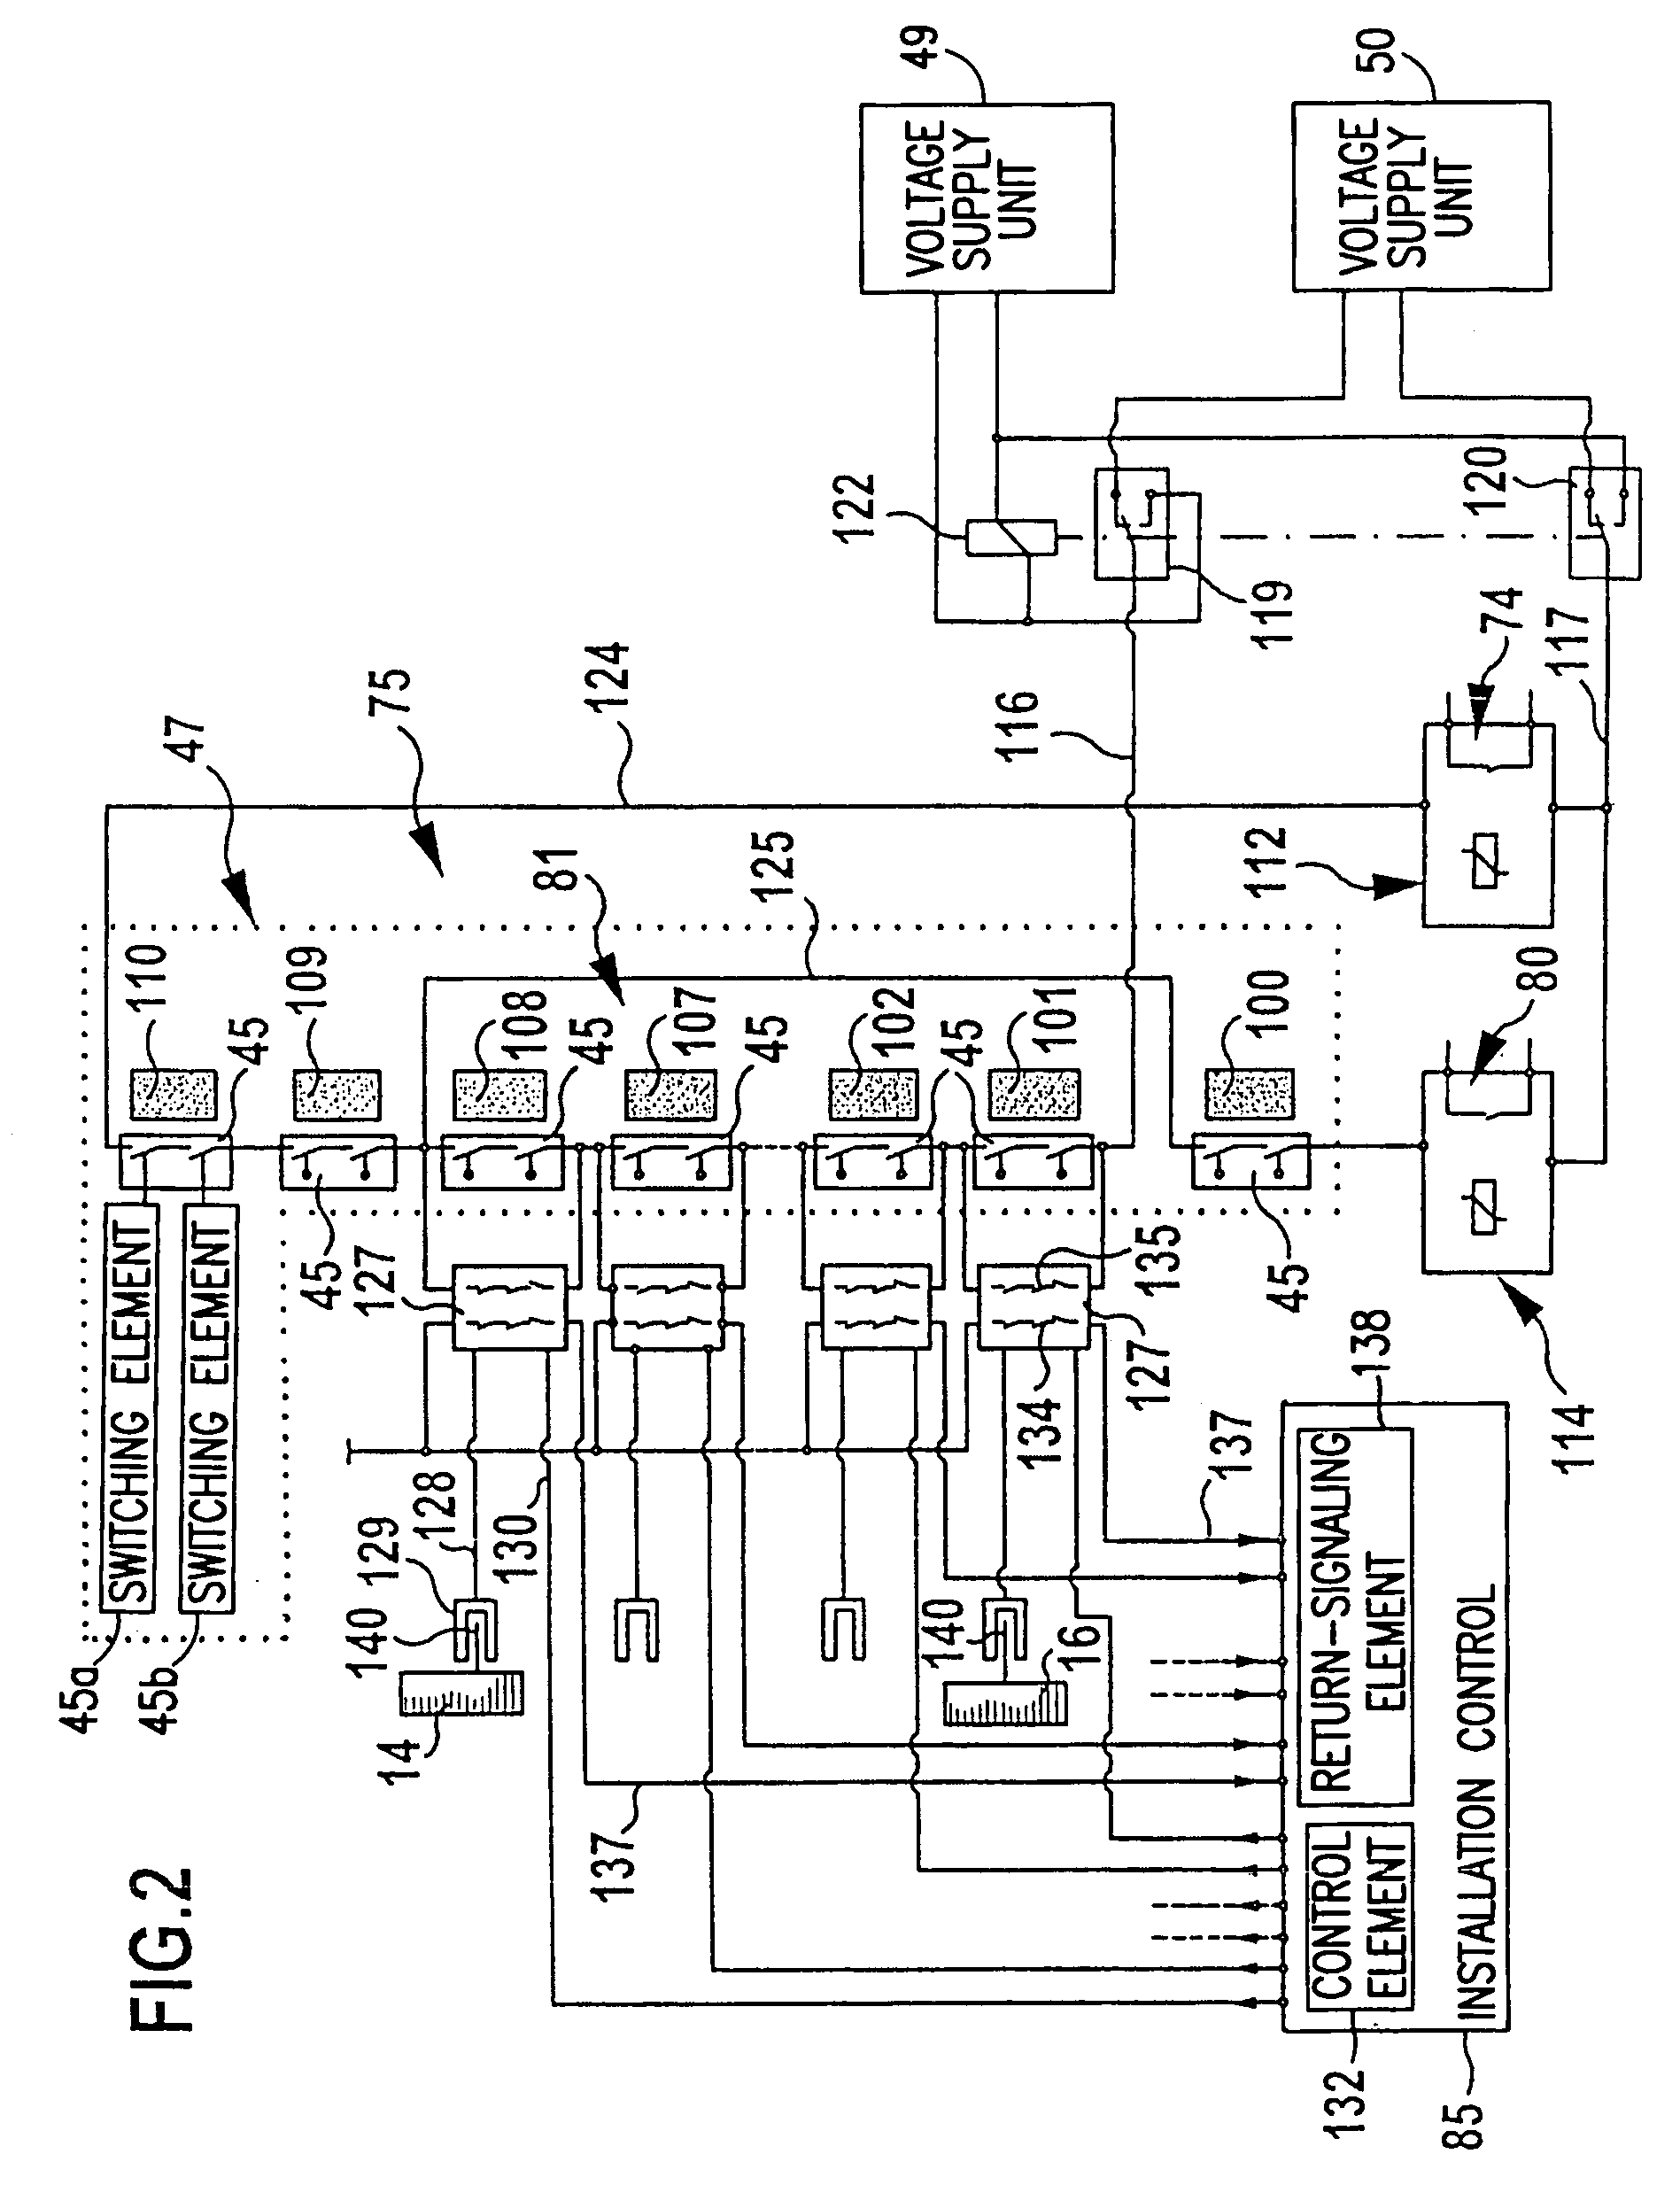 Elevator control having independent safety circuits